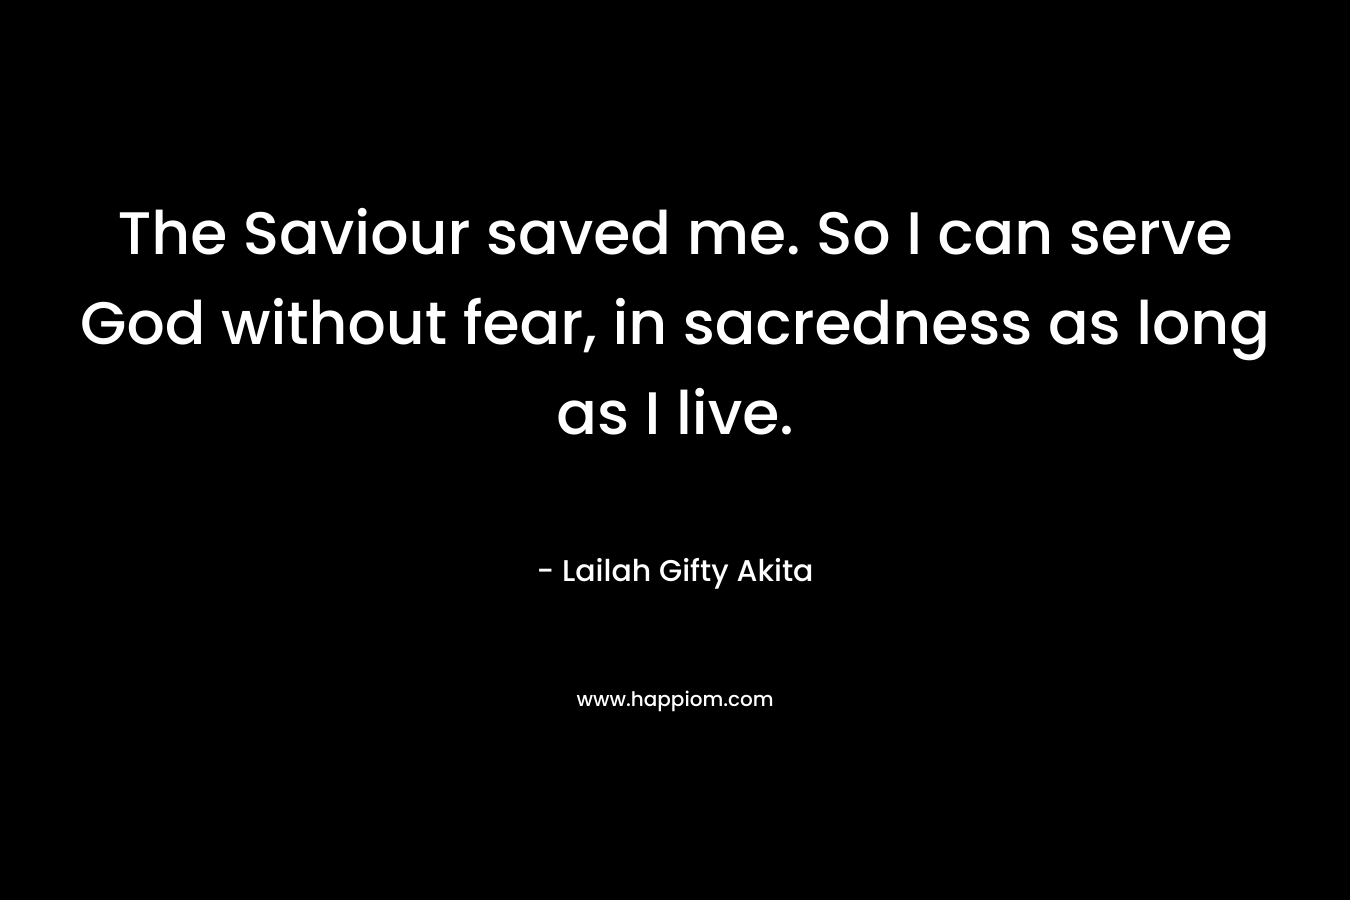 The Saviour saved me. So I can serve God without fear, in sacredness as long as I live. – Lailah Gifty Akita